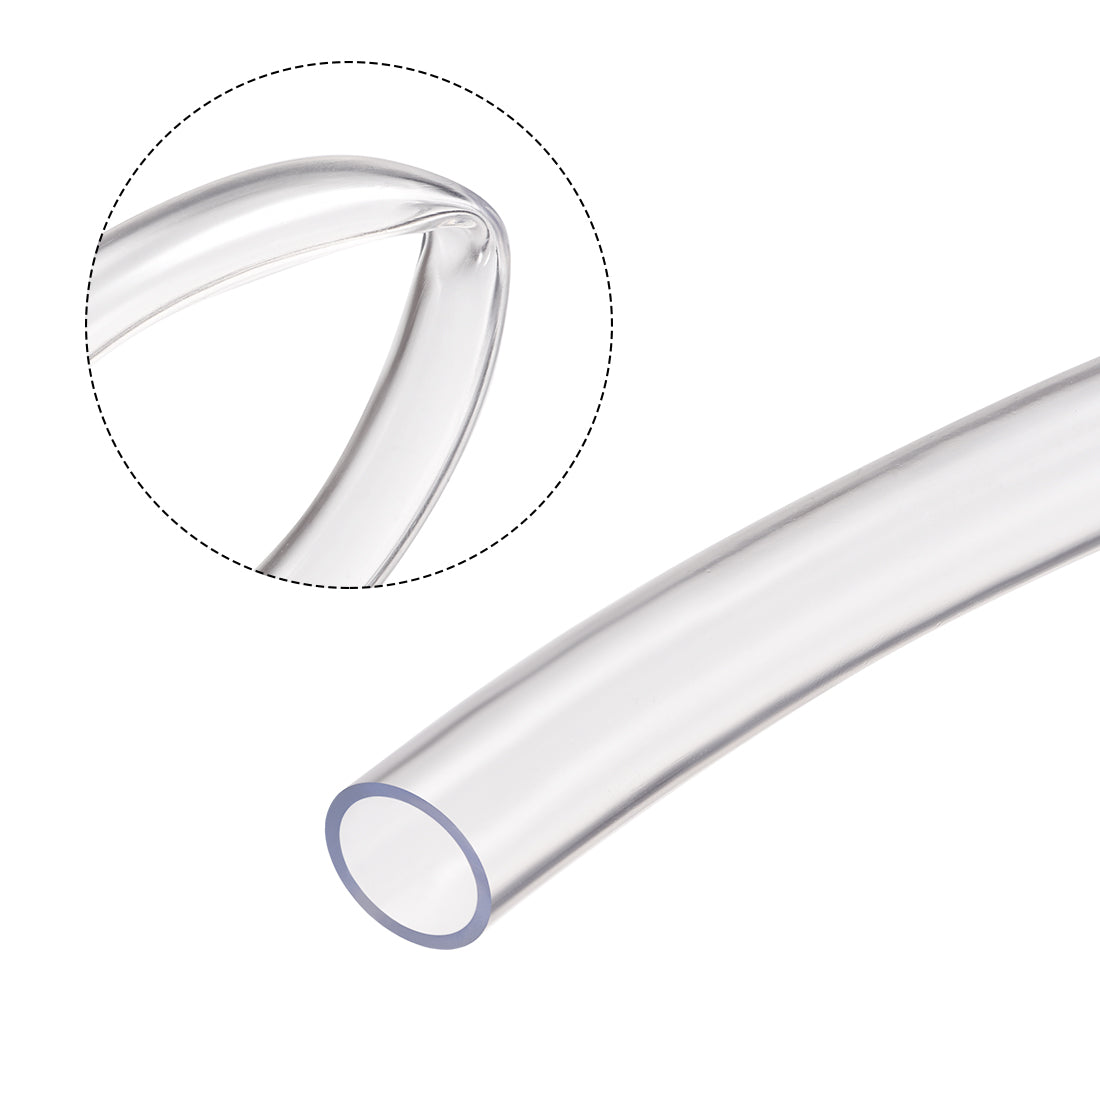 uxcell Uxcell PVC Vinyl Tubing, Plastic Flexible Water Pipe